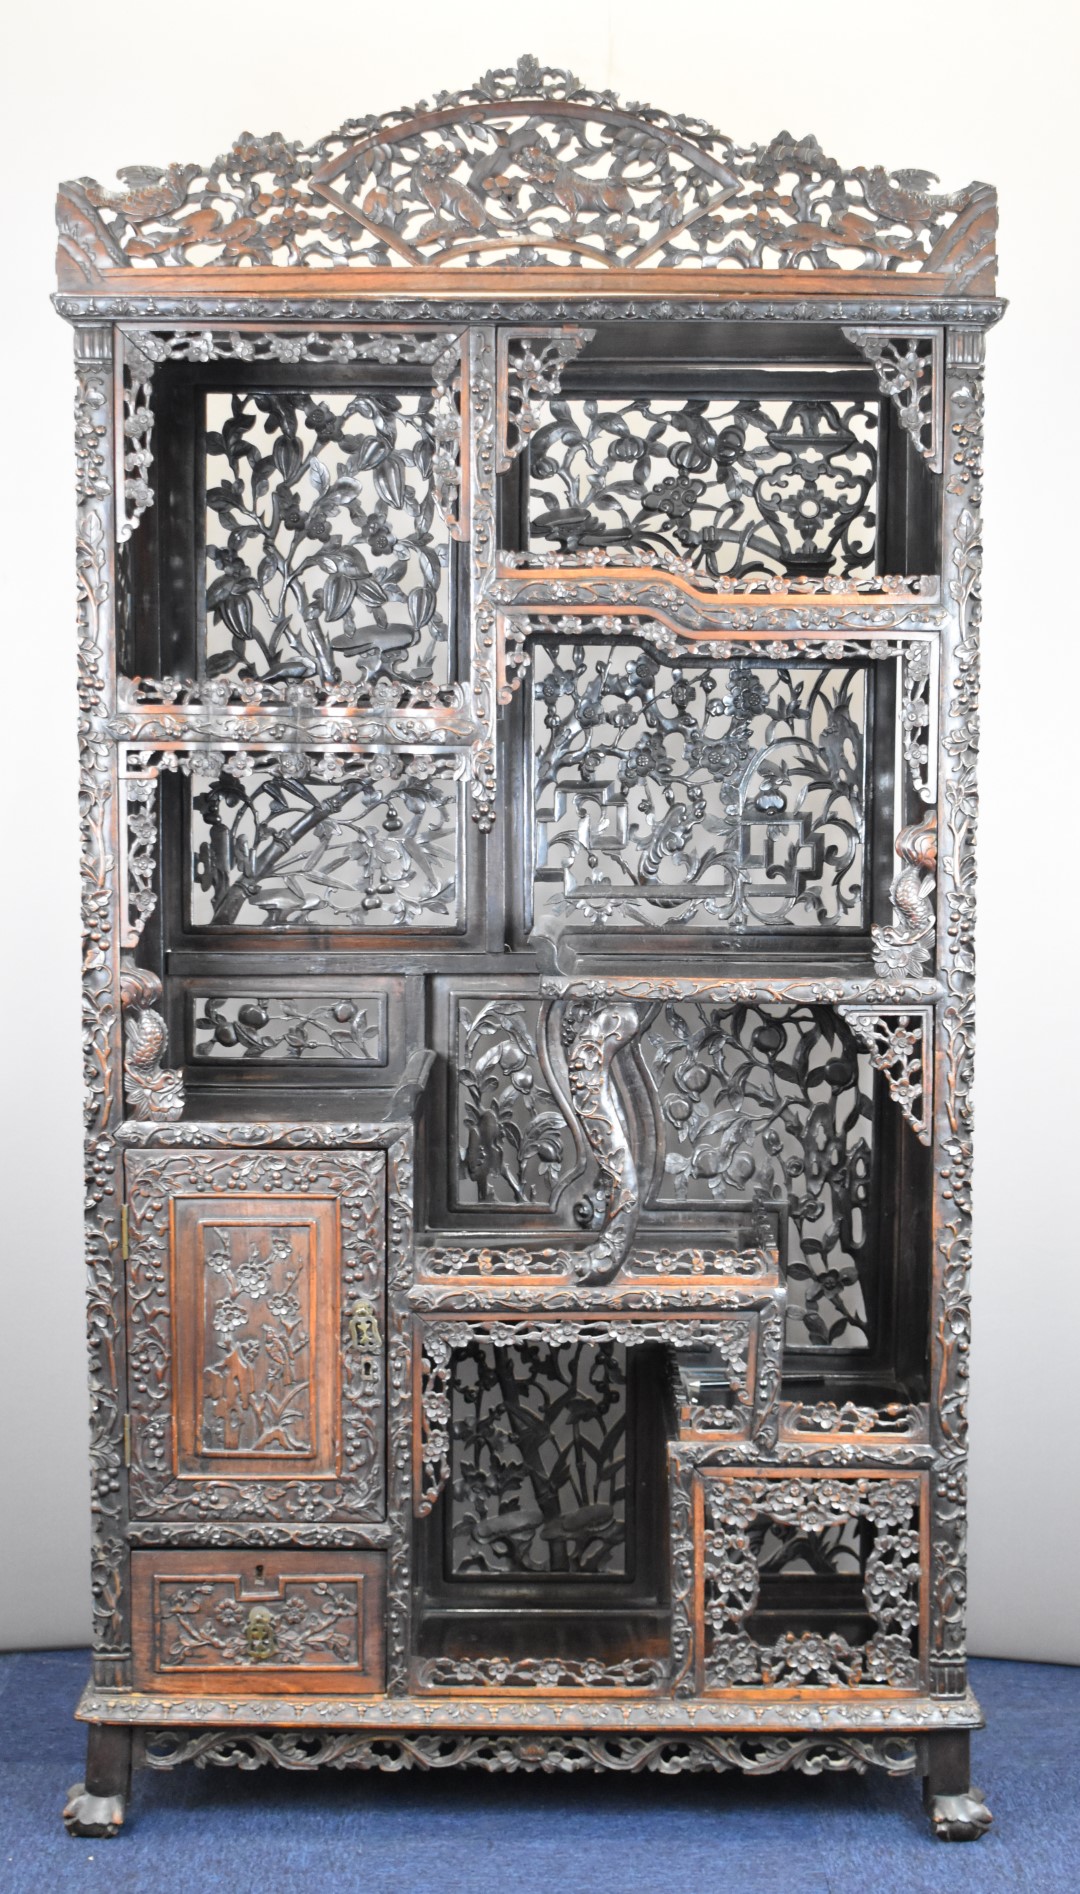 19th / 20thC Chinese carved wood cabinet with an arrangement of tiered and stepped shelves and